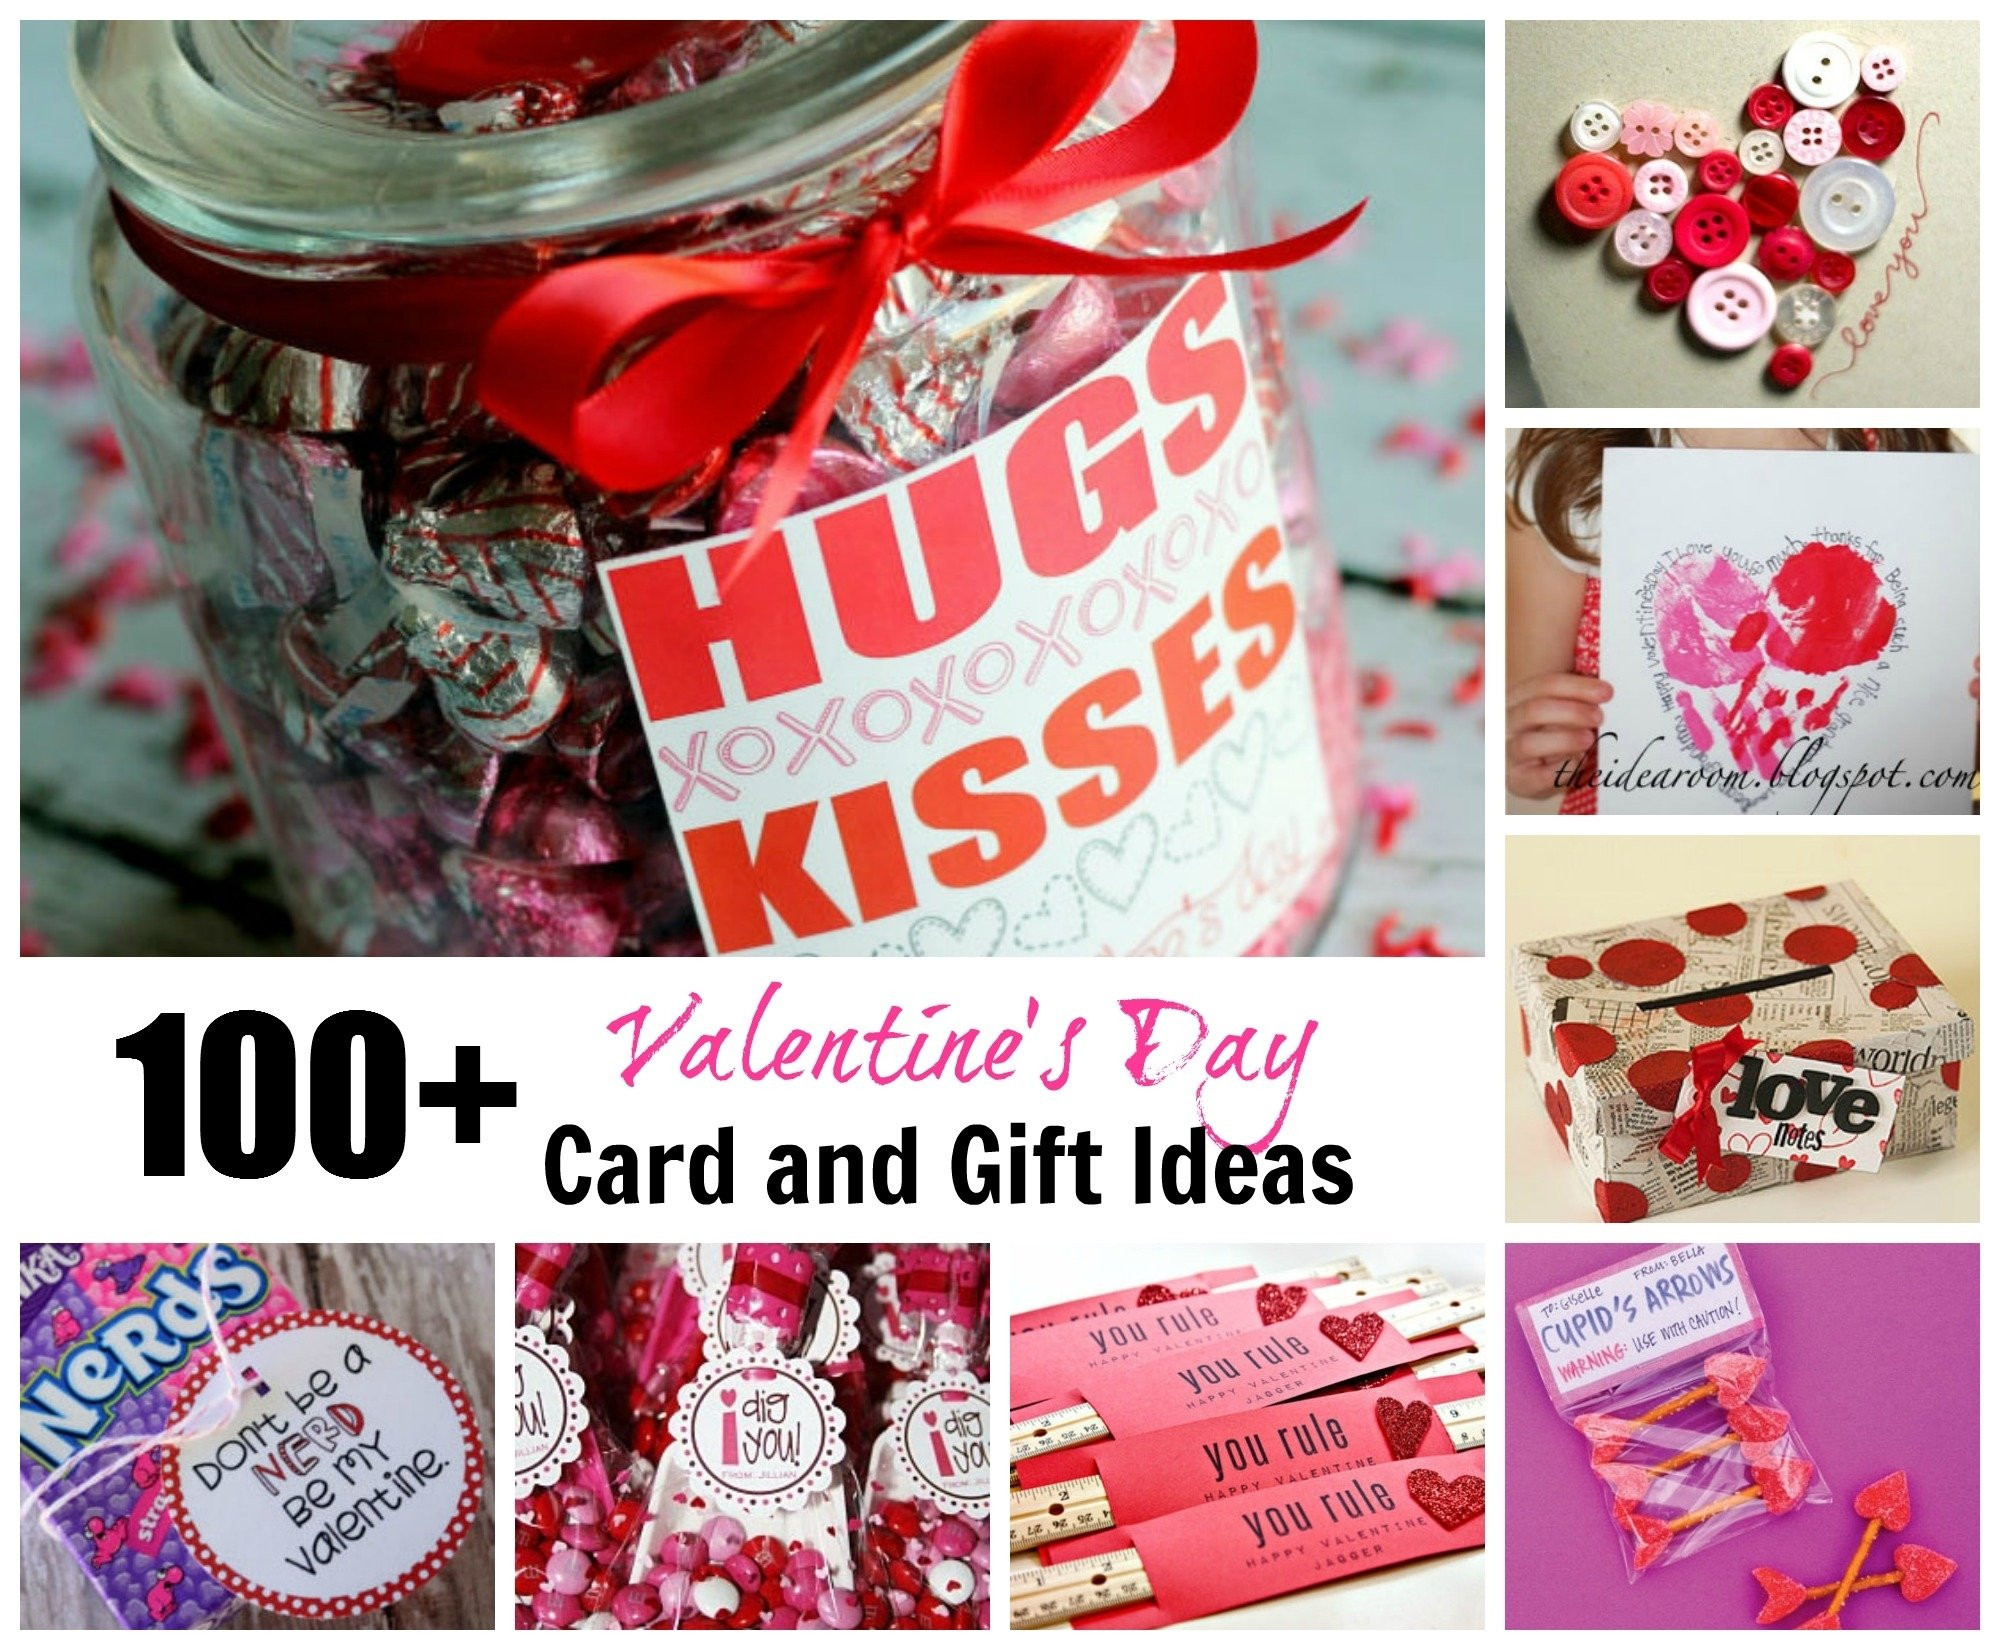 Valentine'S Day Handmade Gift Ideas
 10 Lovable Homemade Valentines Ideas For Him 2020